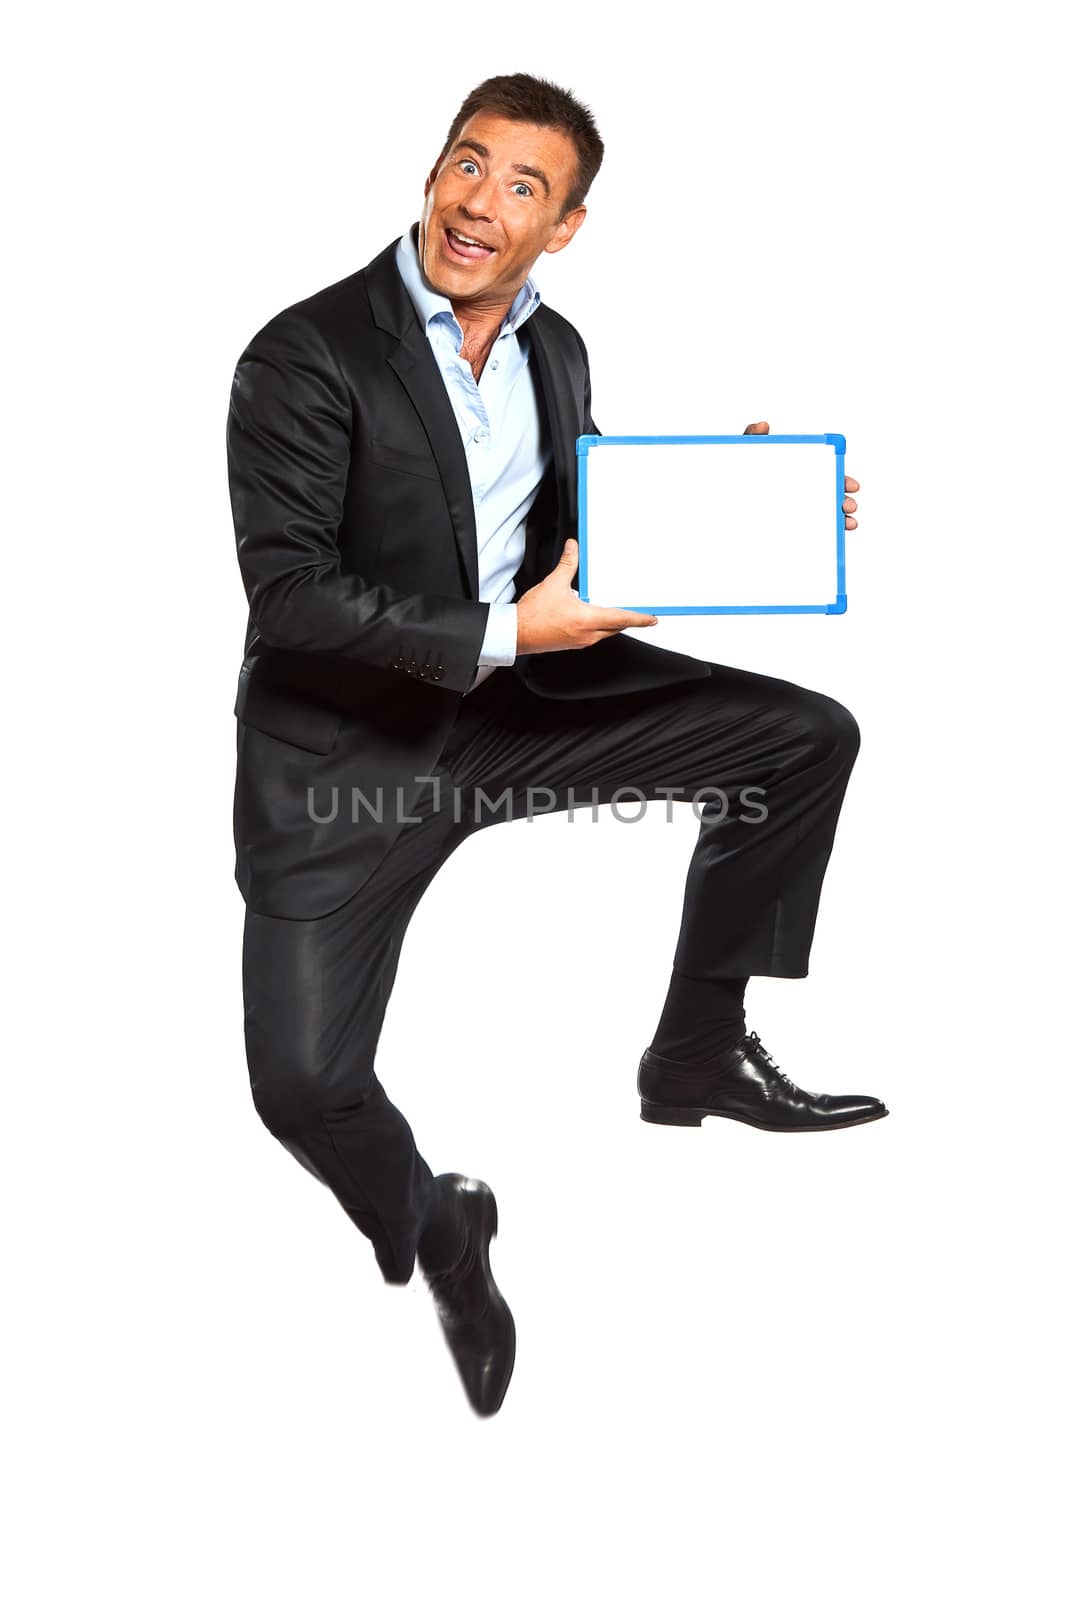 one caucasian business man  jumping holding showing whiteboard in studio isolated on white background